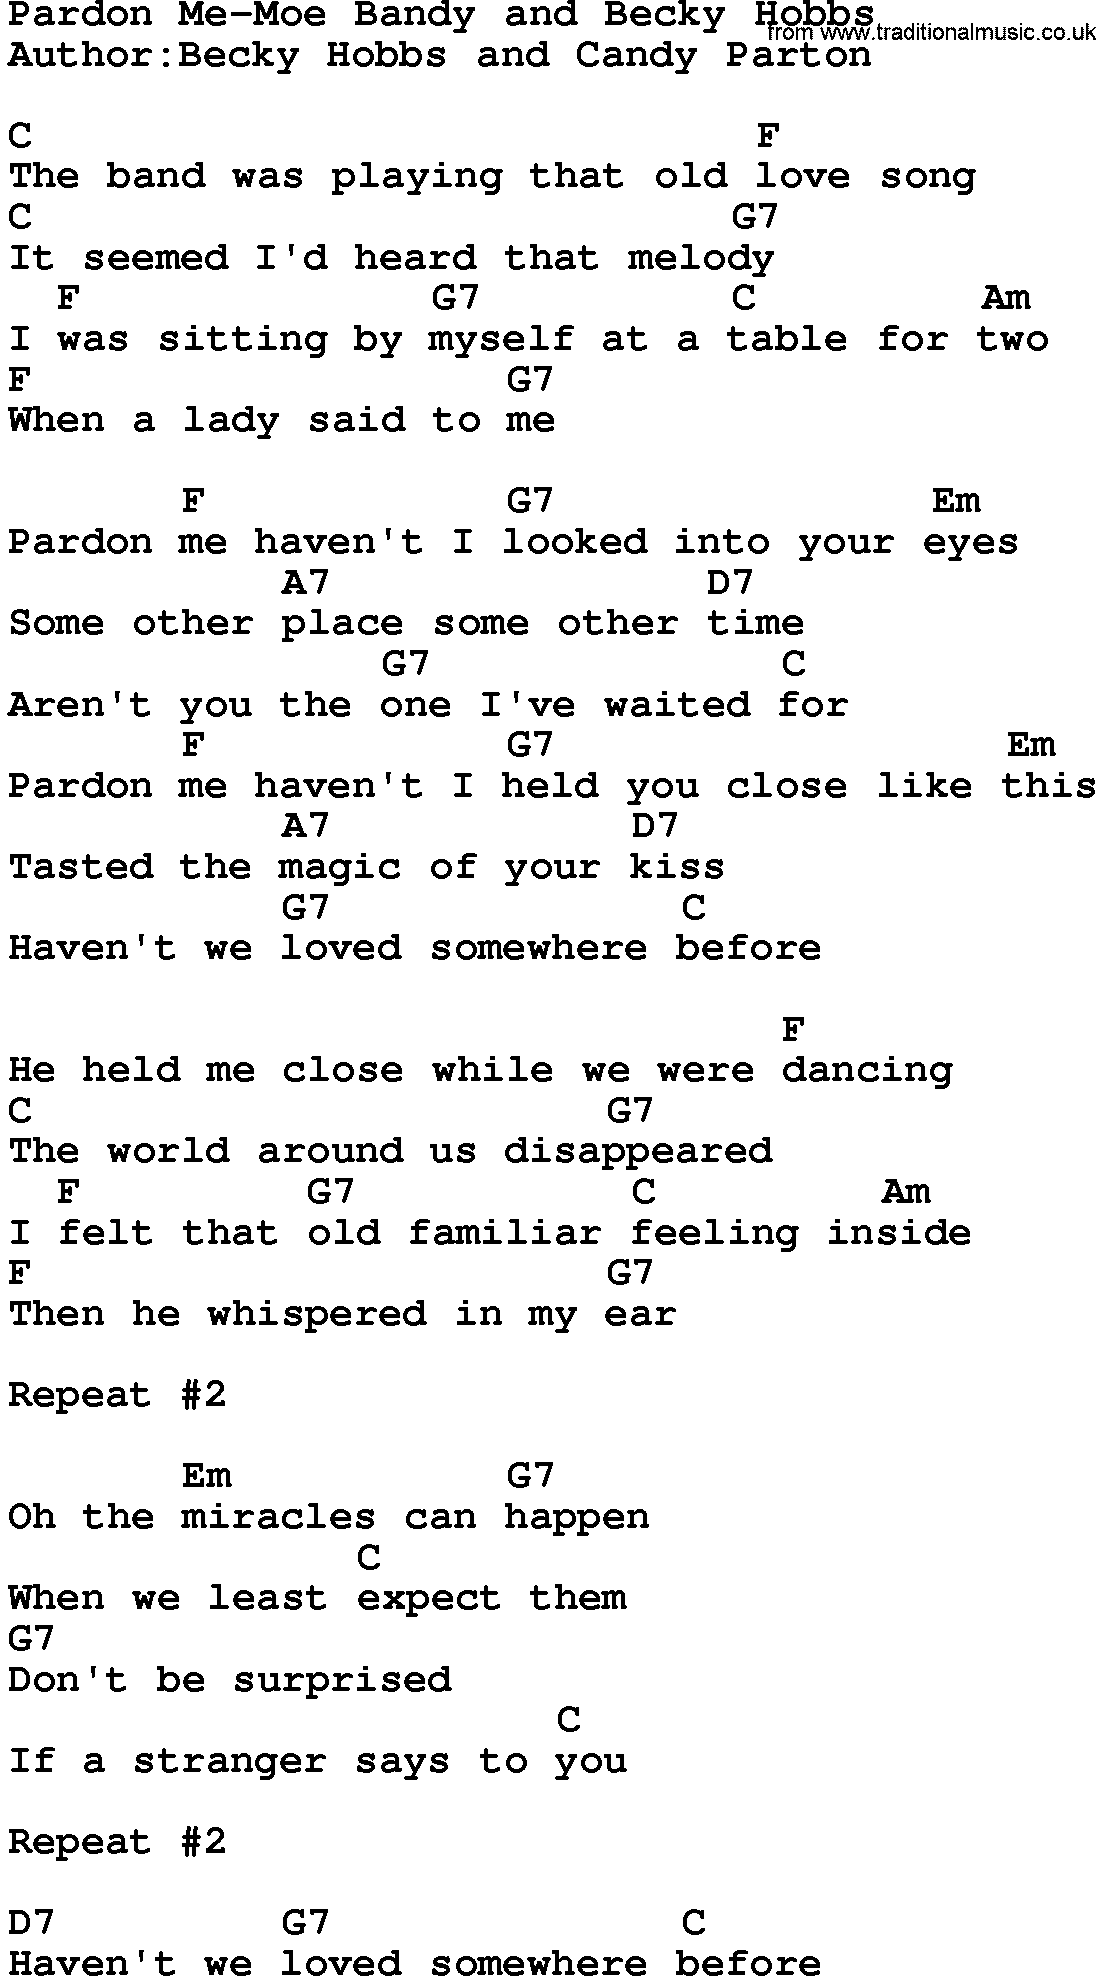 Country music song: Pardon Me-Moe Bandy And Becky Hobbs lyrics and chords